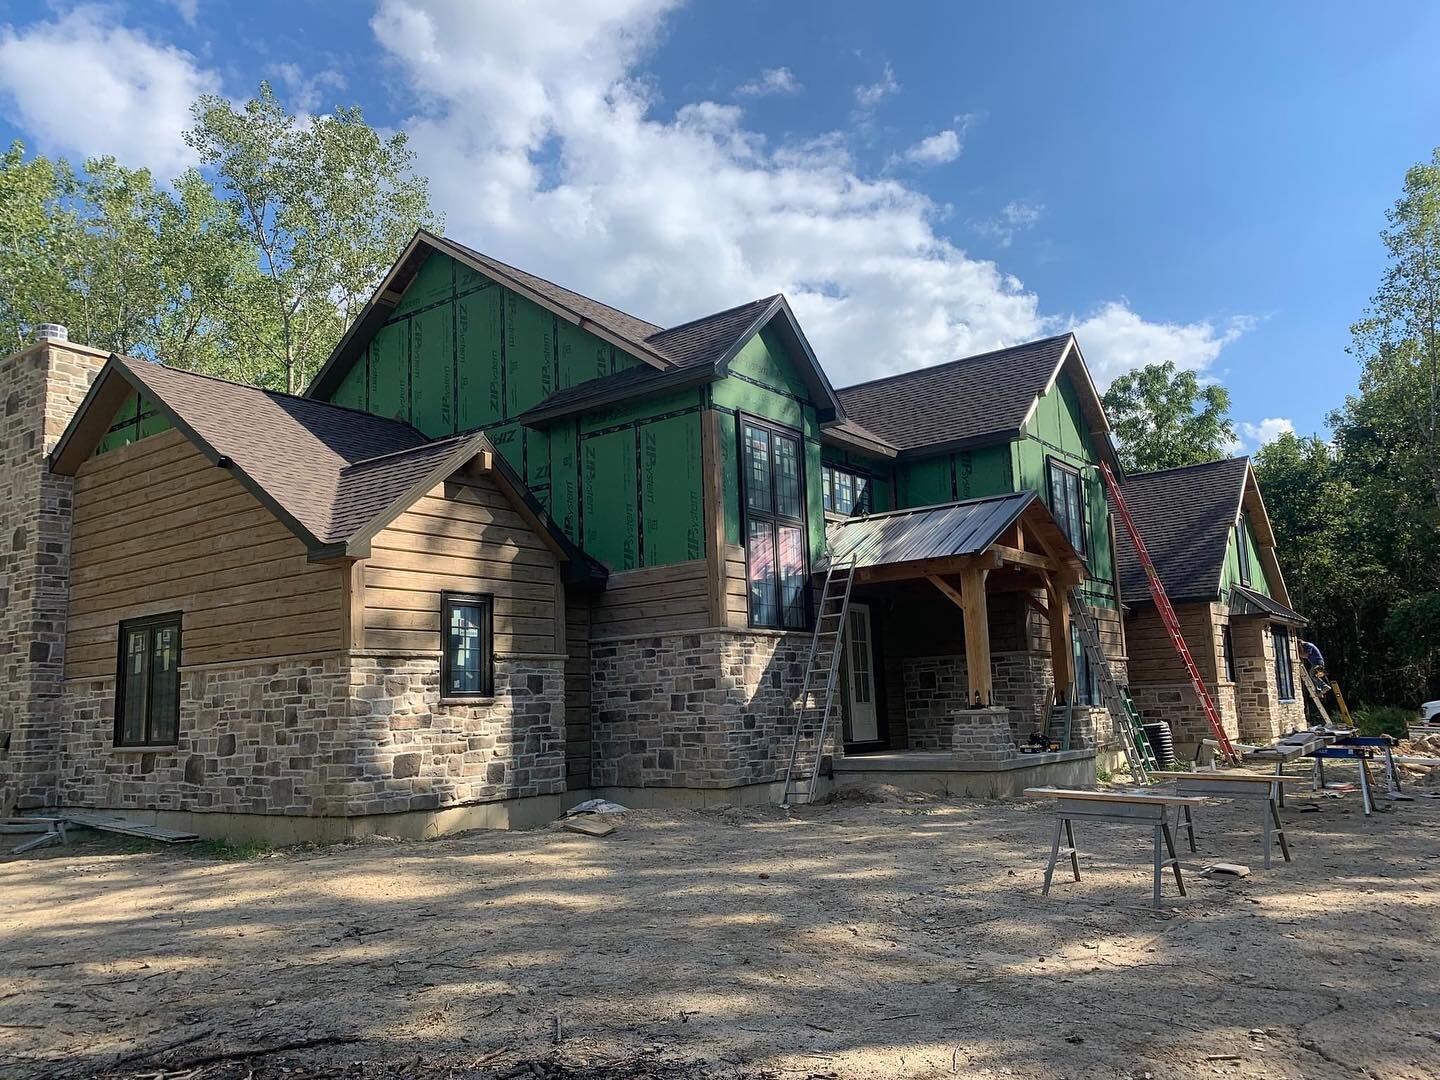 This home we are building uses @everlogs - a siding that looks like timber logs but is actually made of concrete. It's a beautiful material with the durability of concrete, and it's the third home in Ohio to use this system.